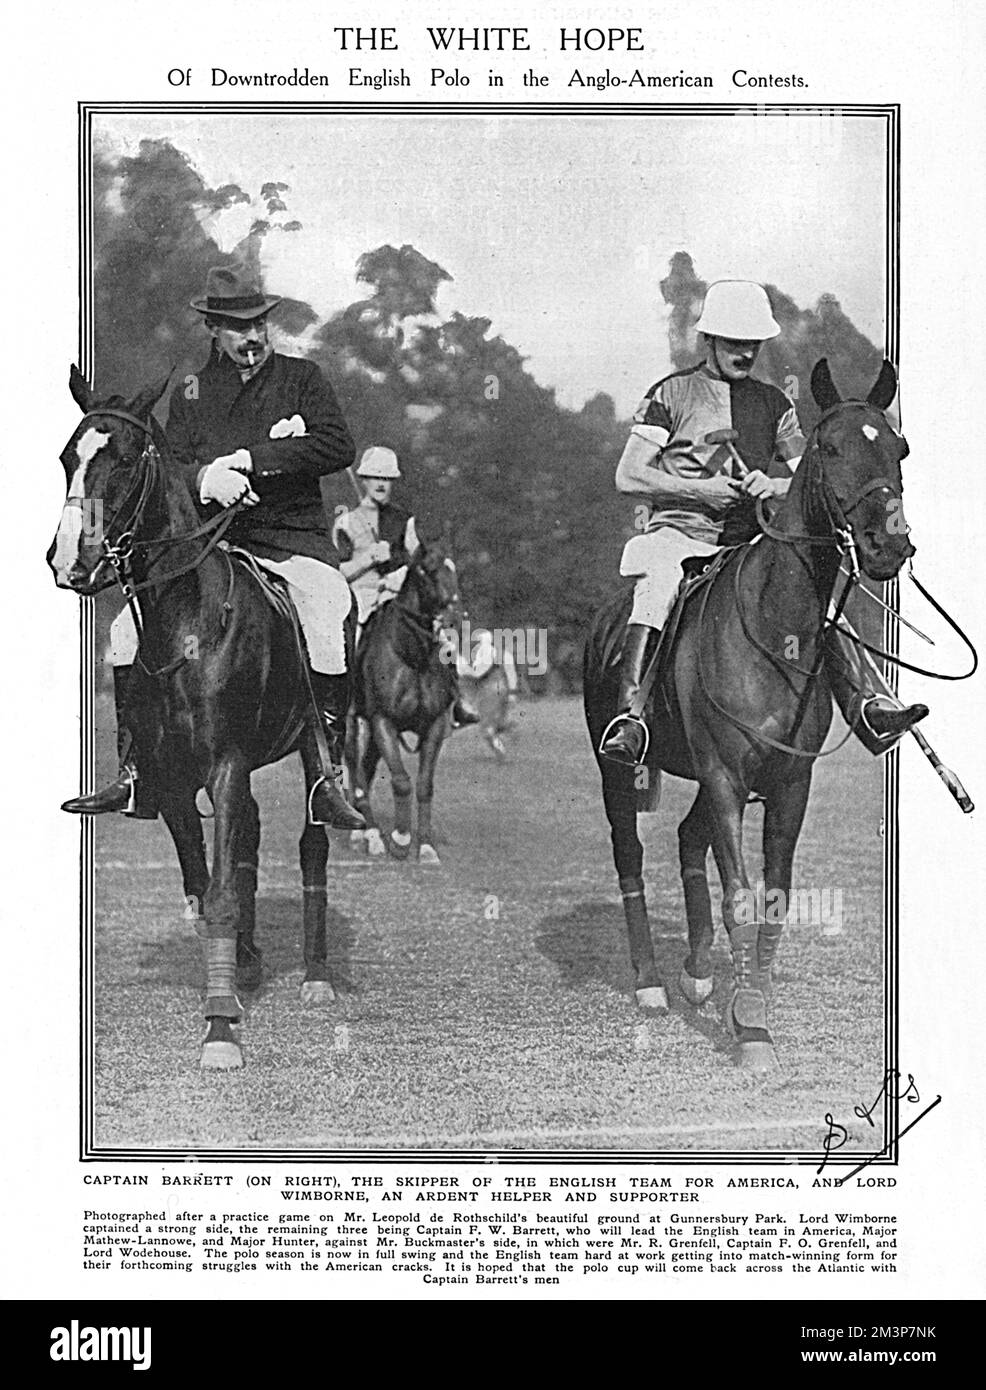 Captain Frederick Barrett, captain of the 1914 England polo team, pictured with Lord Wimborne, a supporter and helper of the team, at a practice game on Leopold de Rothschild's ground at Gunnersbury Park.  The Tatler entitled the image, 'The White Hope - of downtrodden English polo in the Anglo-American contests.'  England had been beaten by America in the recent previous contests over the Westchester Cup, but in 1914, they achieved a historic and emphatic victory with the team of Captains Barrett, Cheape, Tomkinson and Lockett.     Date: 1914 Stock Photo